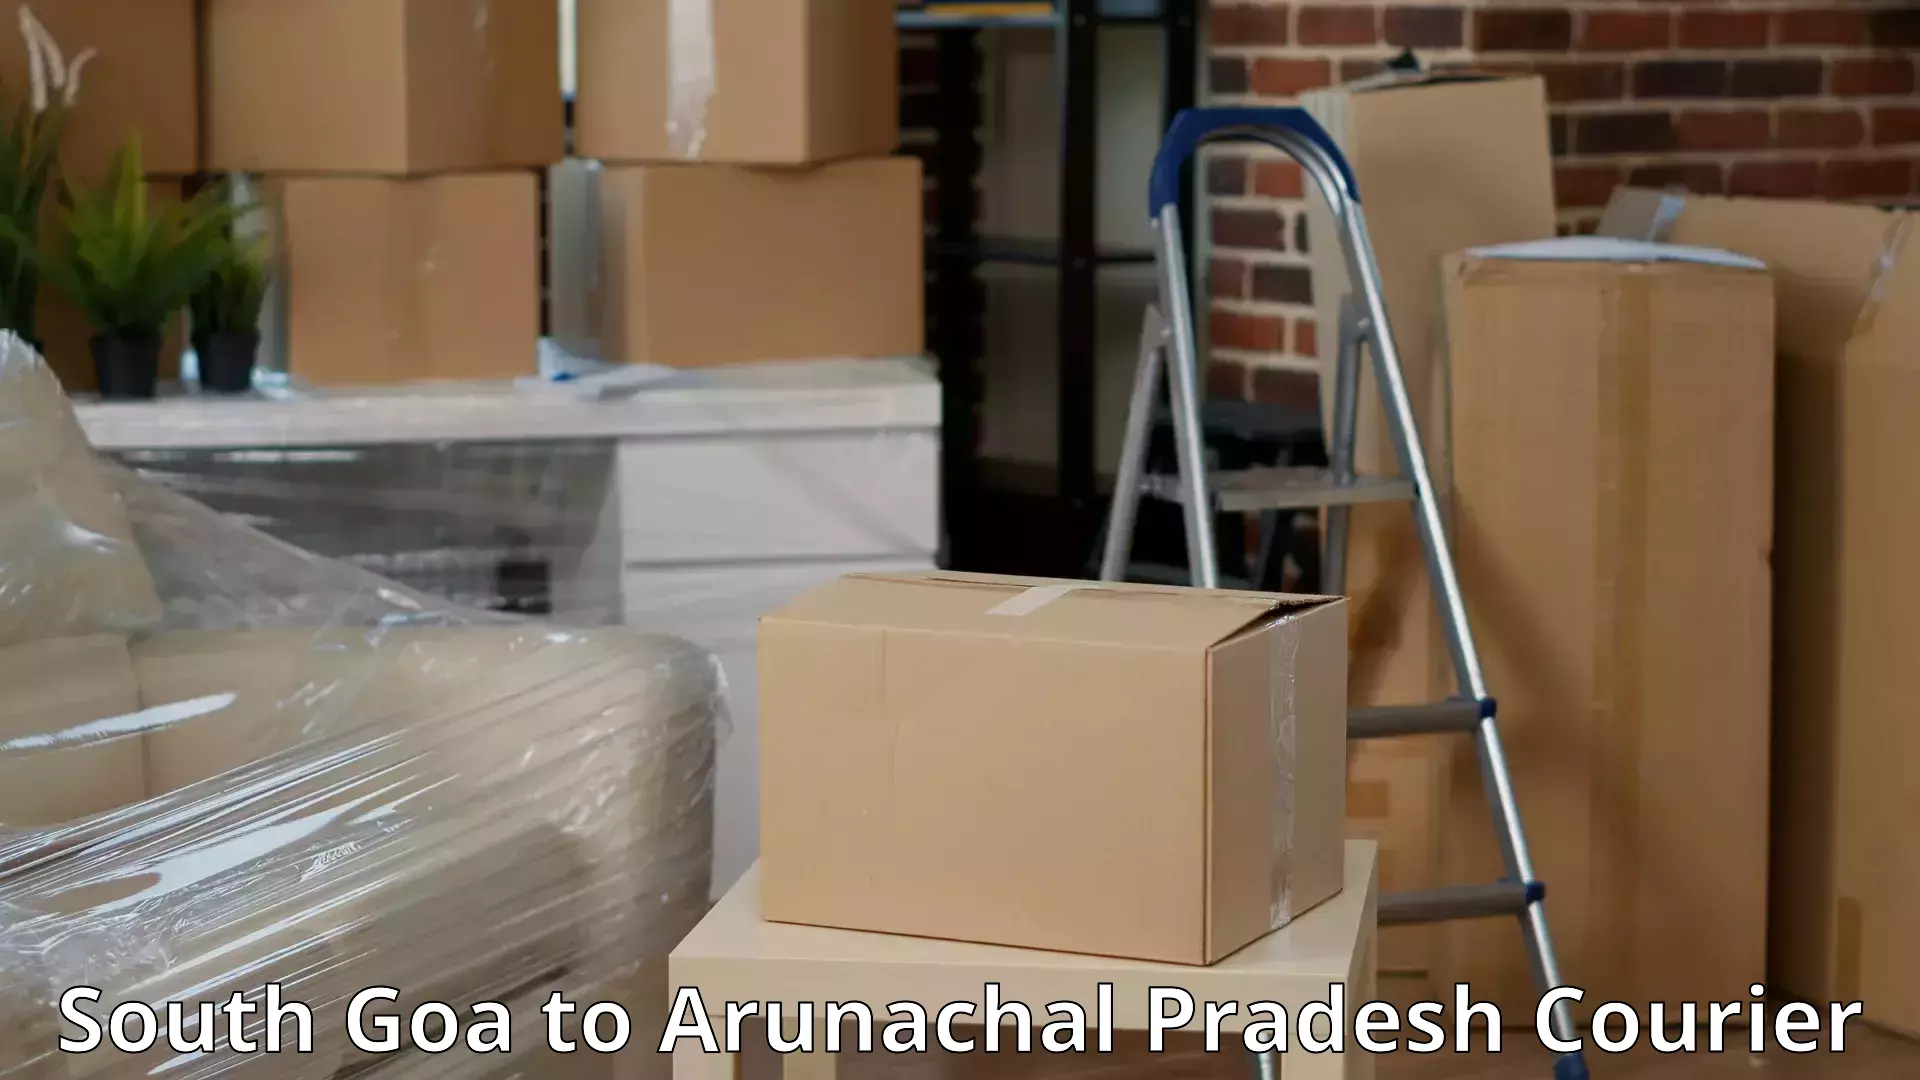 Trusted household movers South Goa to Arunachal Pradesh